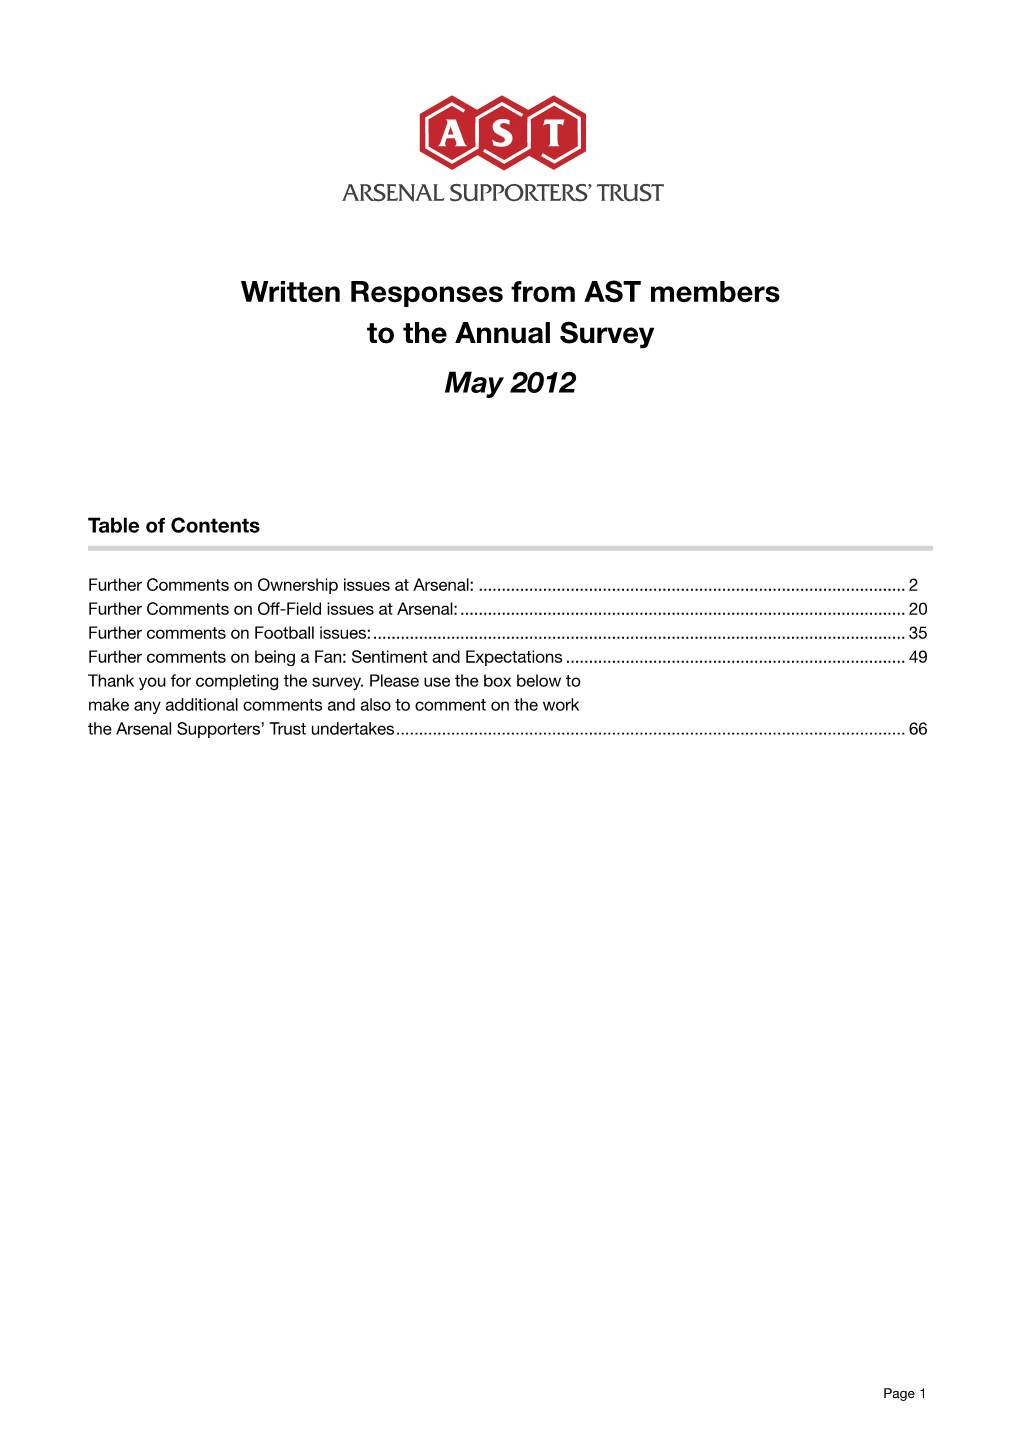 Written Responses from AST Members to the Annual Survey May 2012